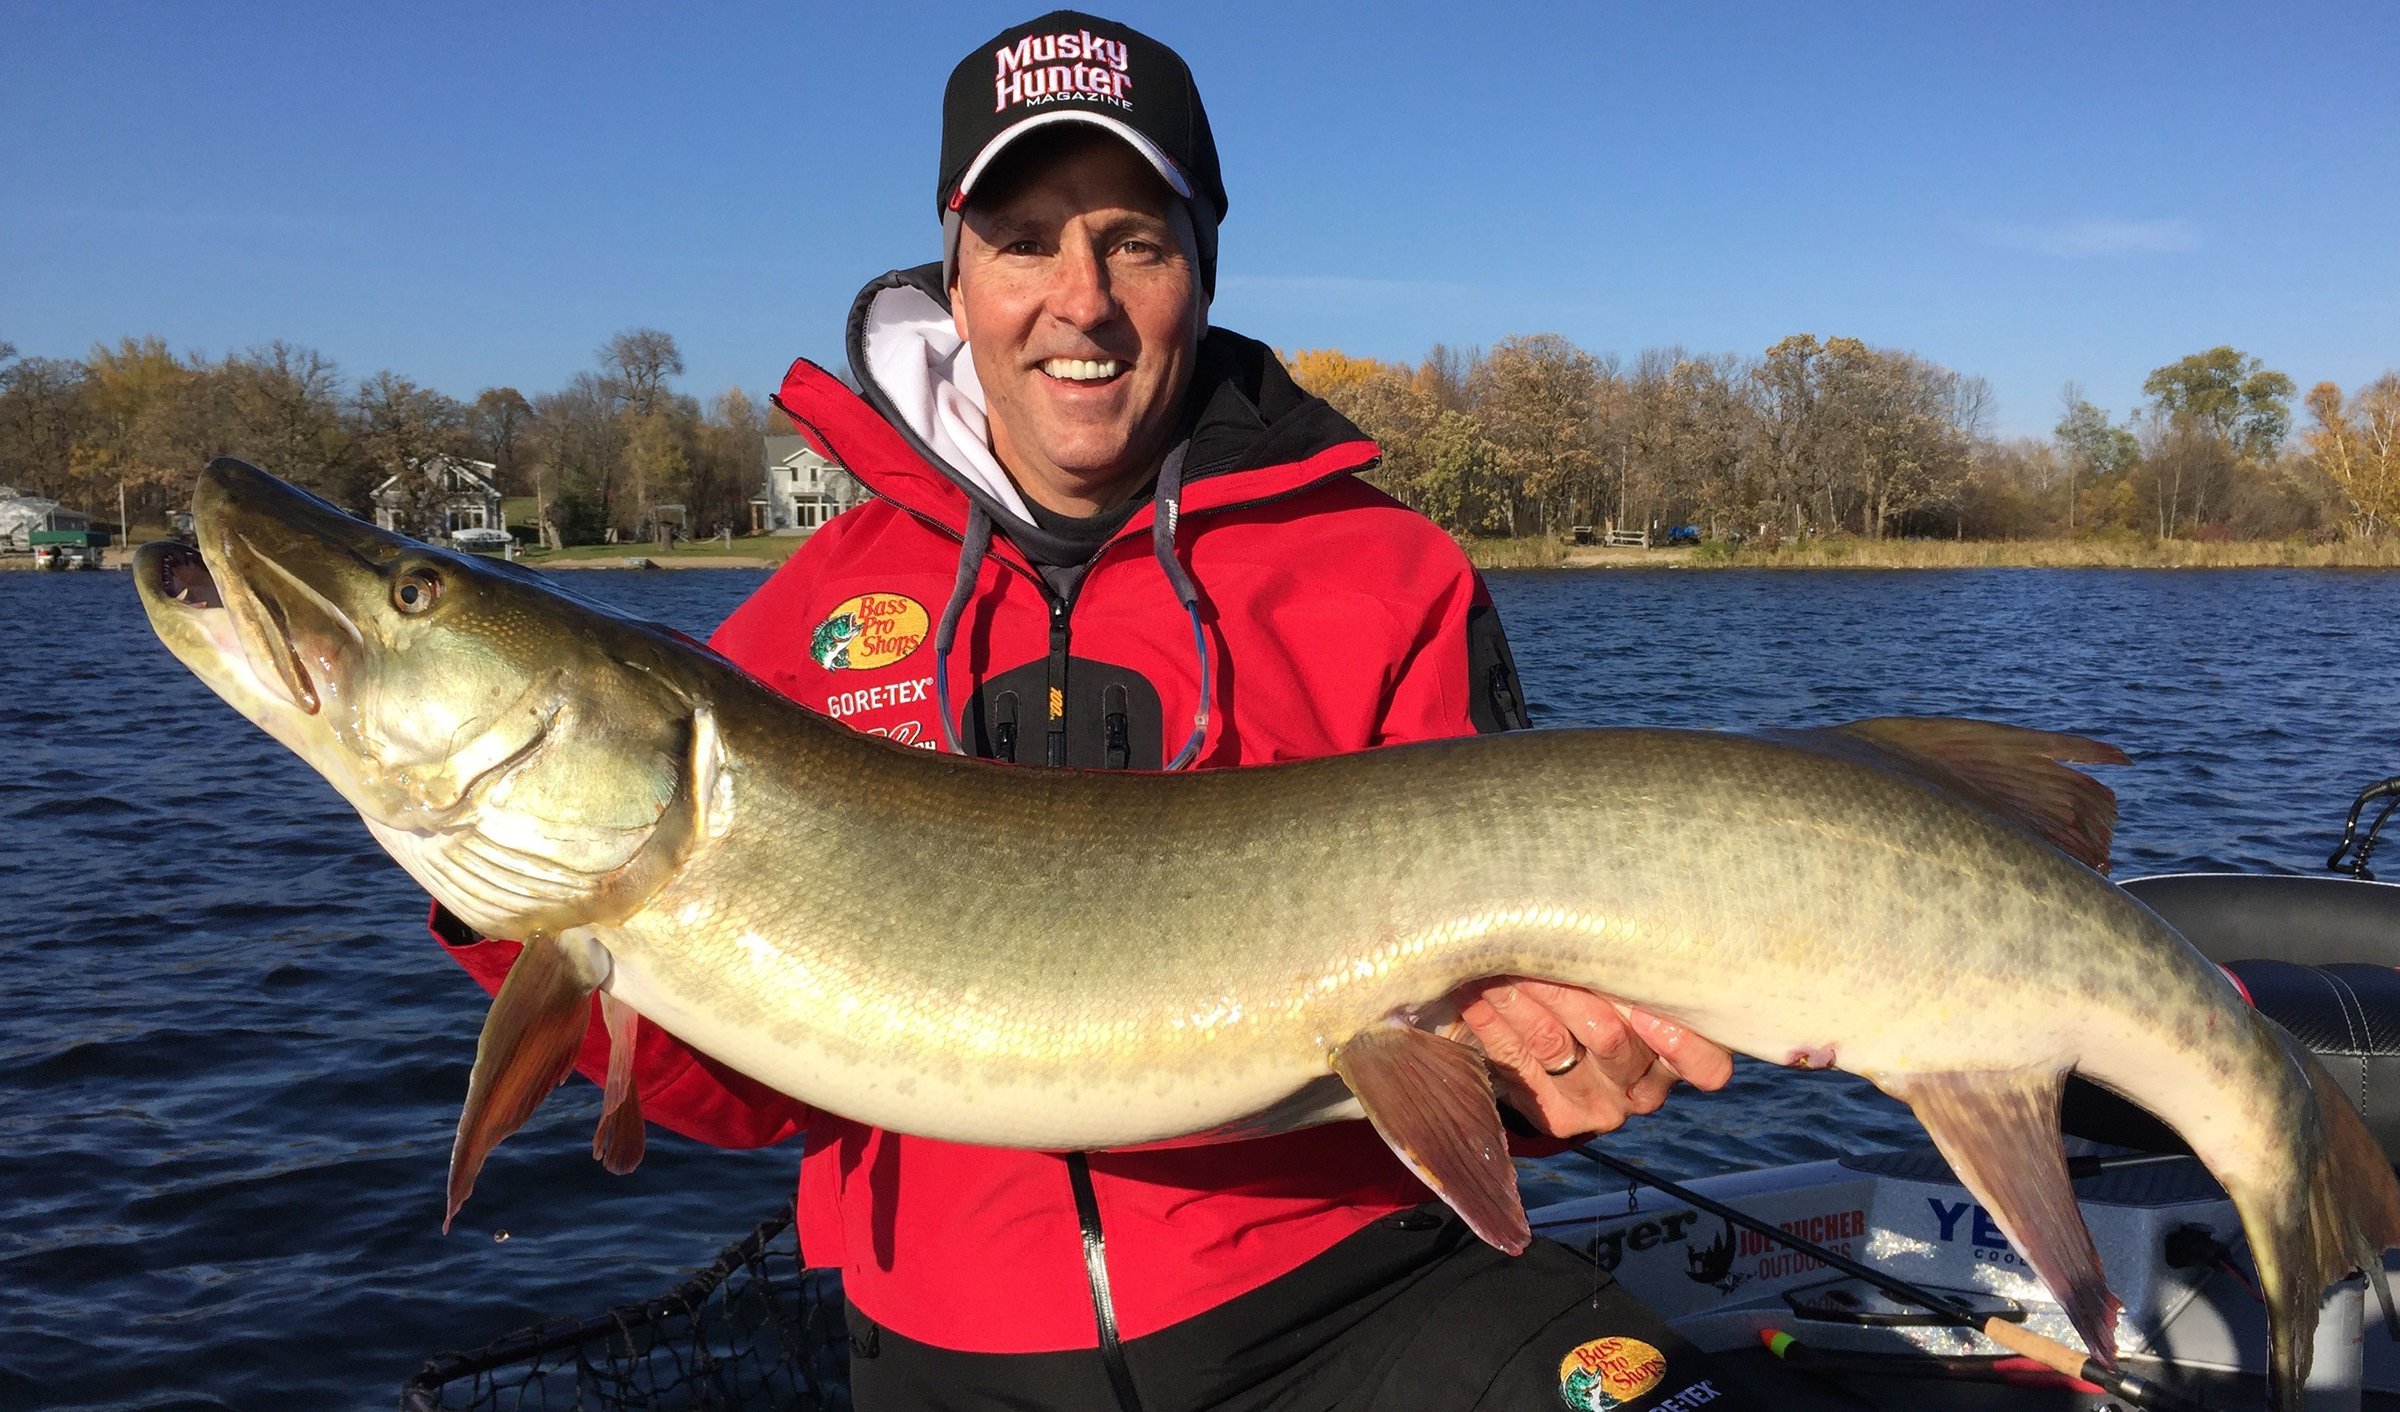 Grab your Biggest Fishing Rod and Warmest Coat – it’s Musky Time!